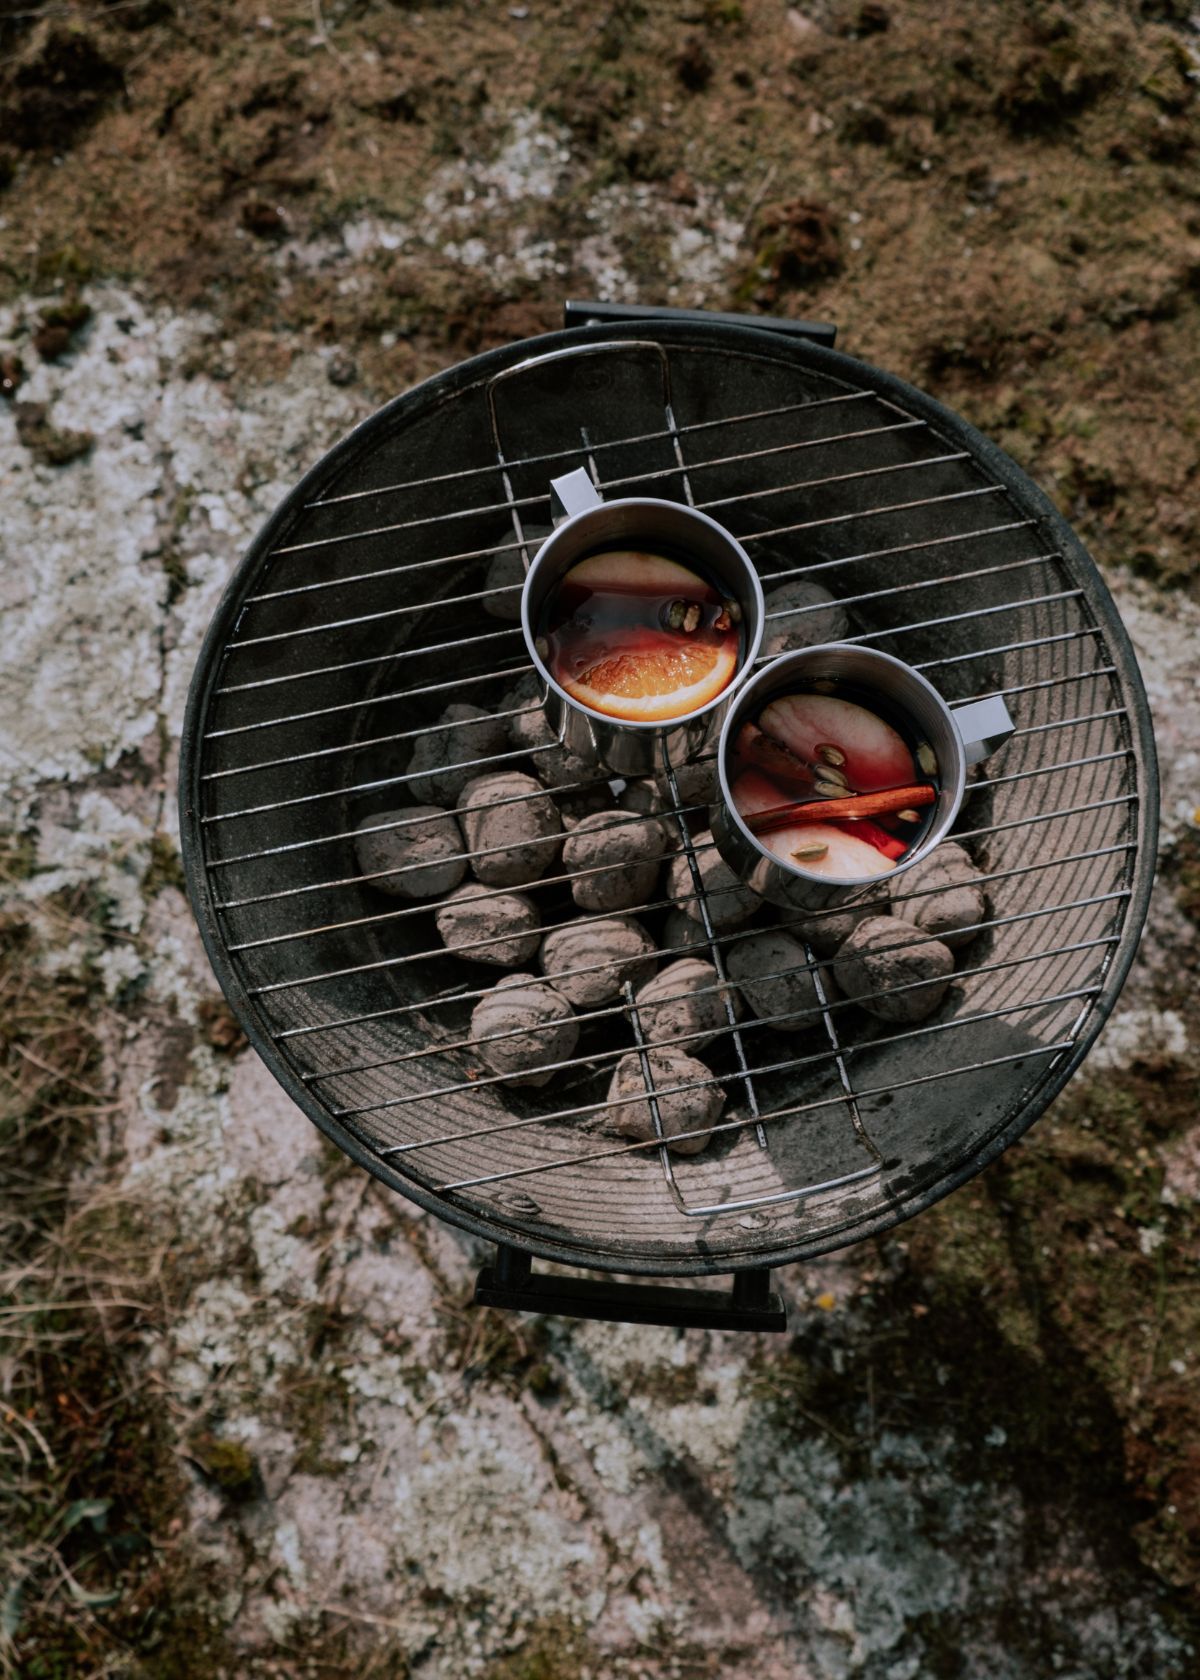 Best portable charcoal grill